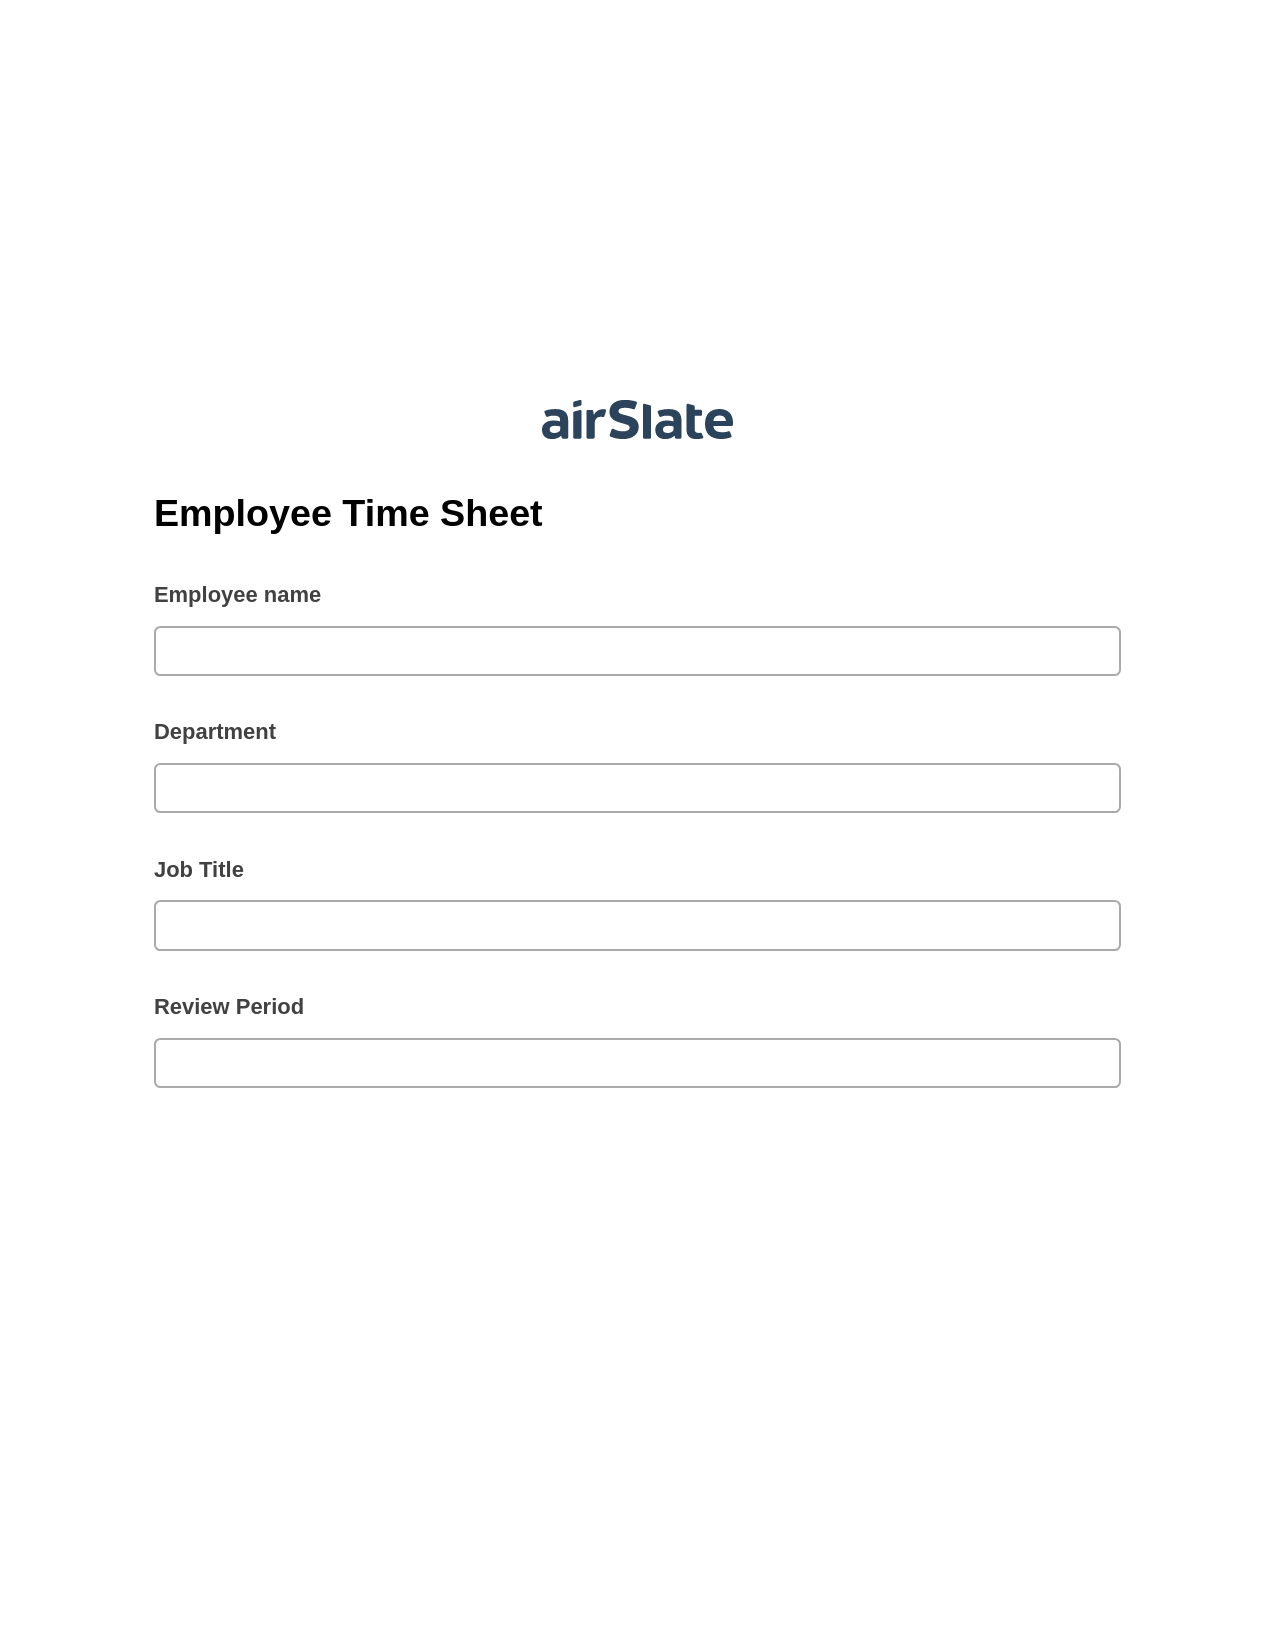 Employee Time Sheet Pre-fill from another Slate Bot, Create slate addon, Export to Google Sheet Bot